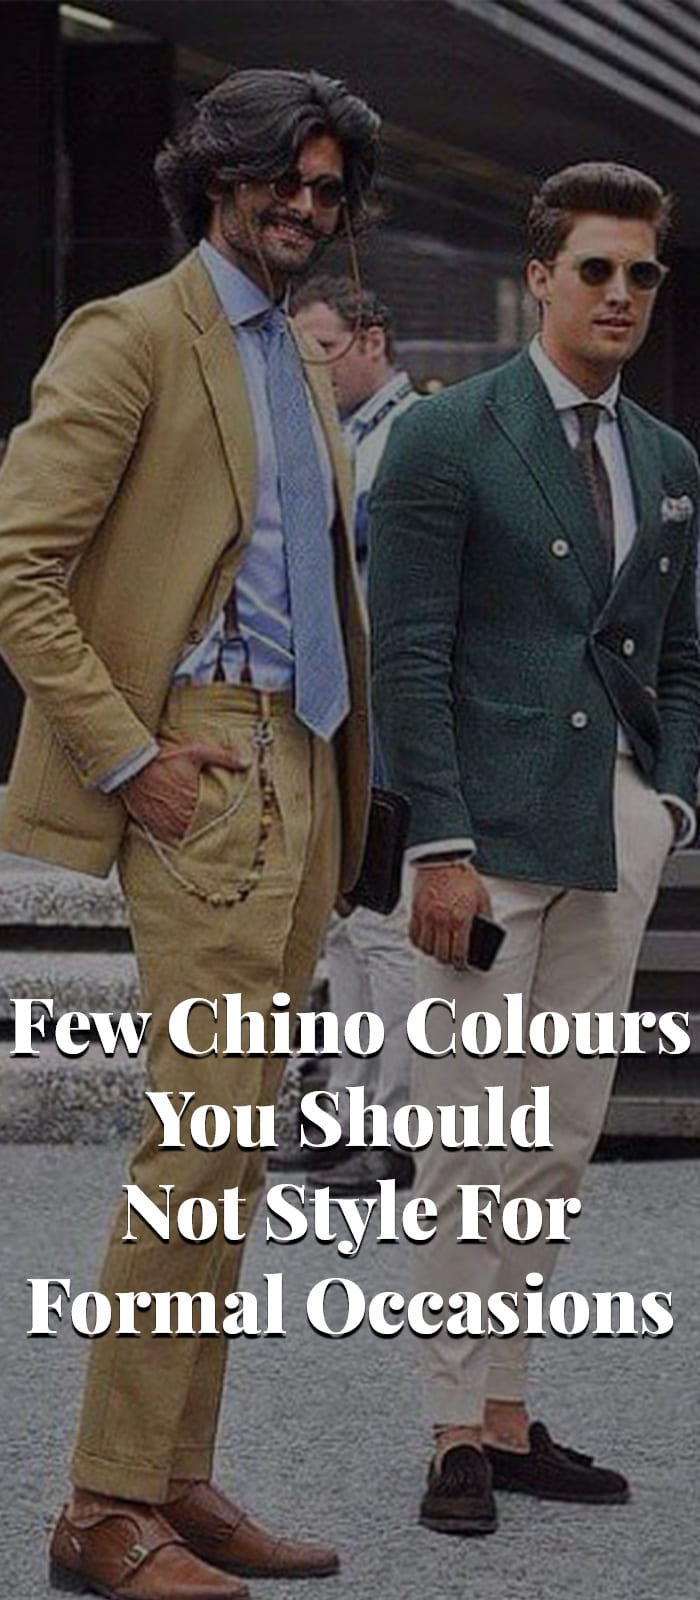 Few Chino Colours You Should Not Style For Formal Occasions